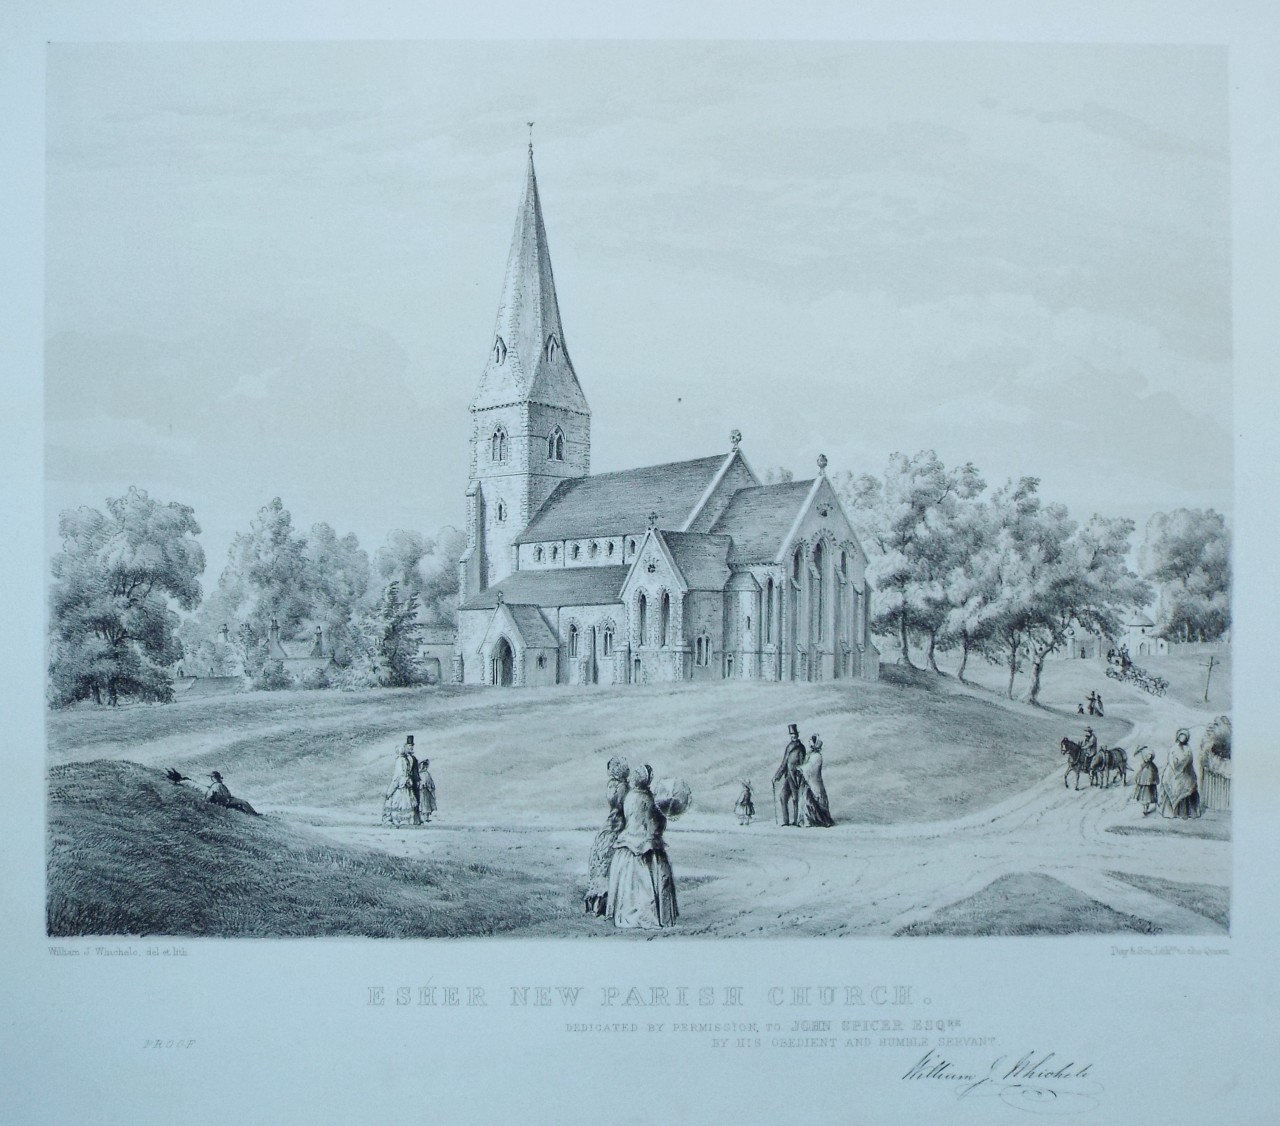 Lithograph - Esher New Parish Church. Dedicated by Permission to John Spicer Esqre. by his Obedient and Humble Servant William J. Whichelo - Whichelo